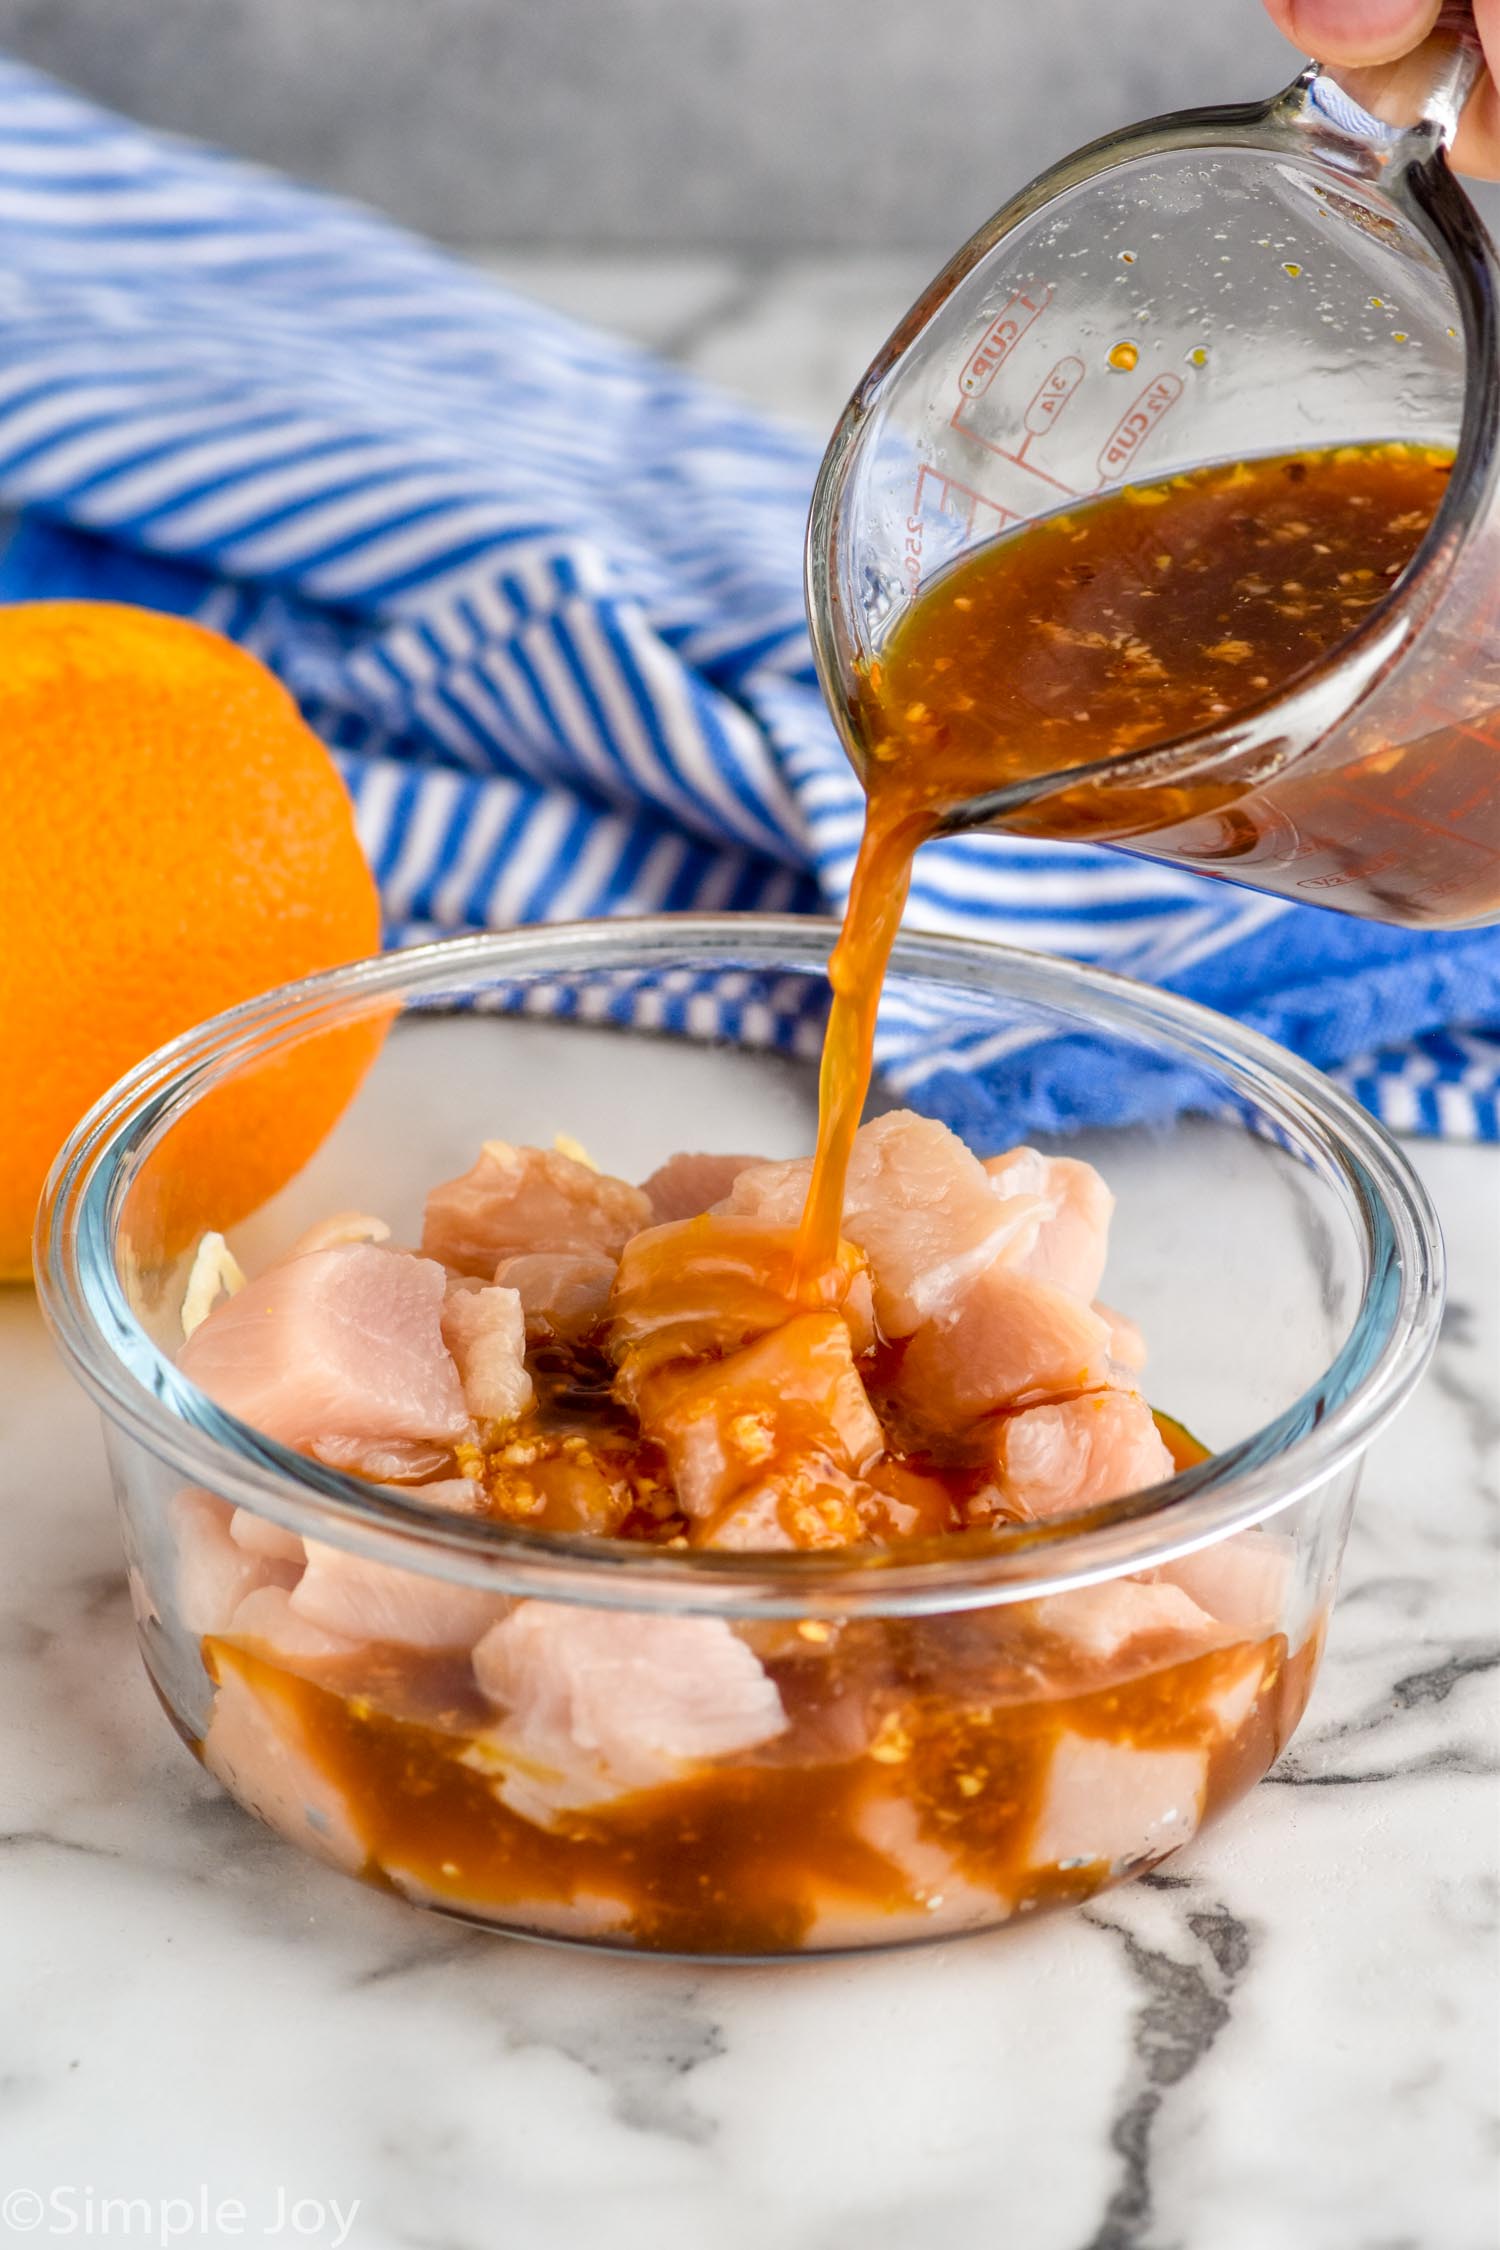 Photo of person's hand pouring measuring cup of ingredients into a container with raw chicken pieces for Orange Chicken recipe.